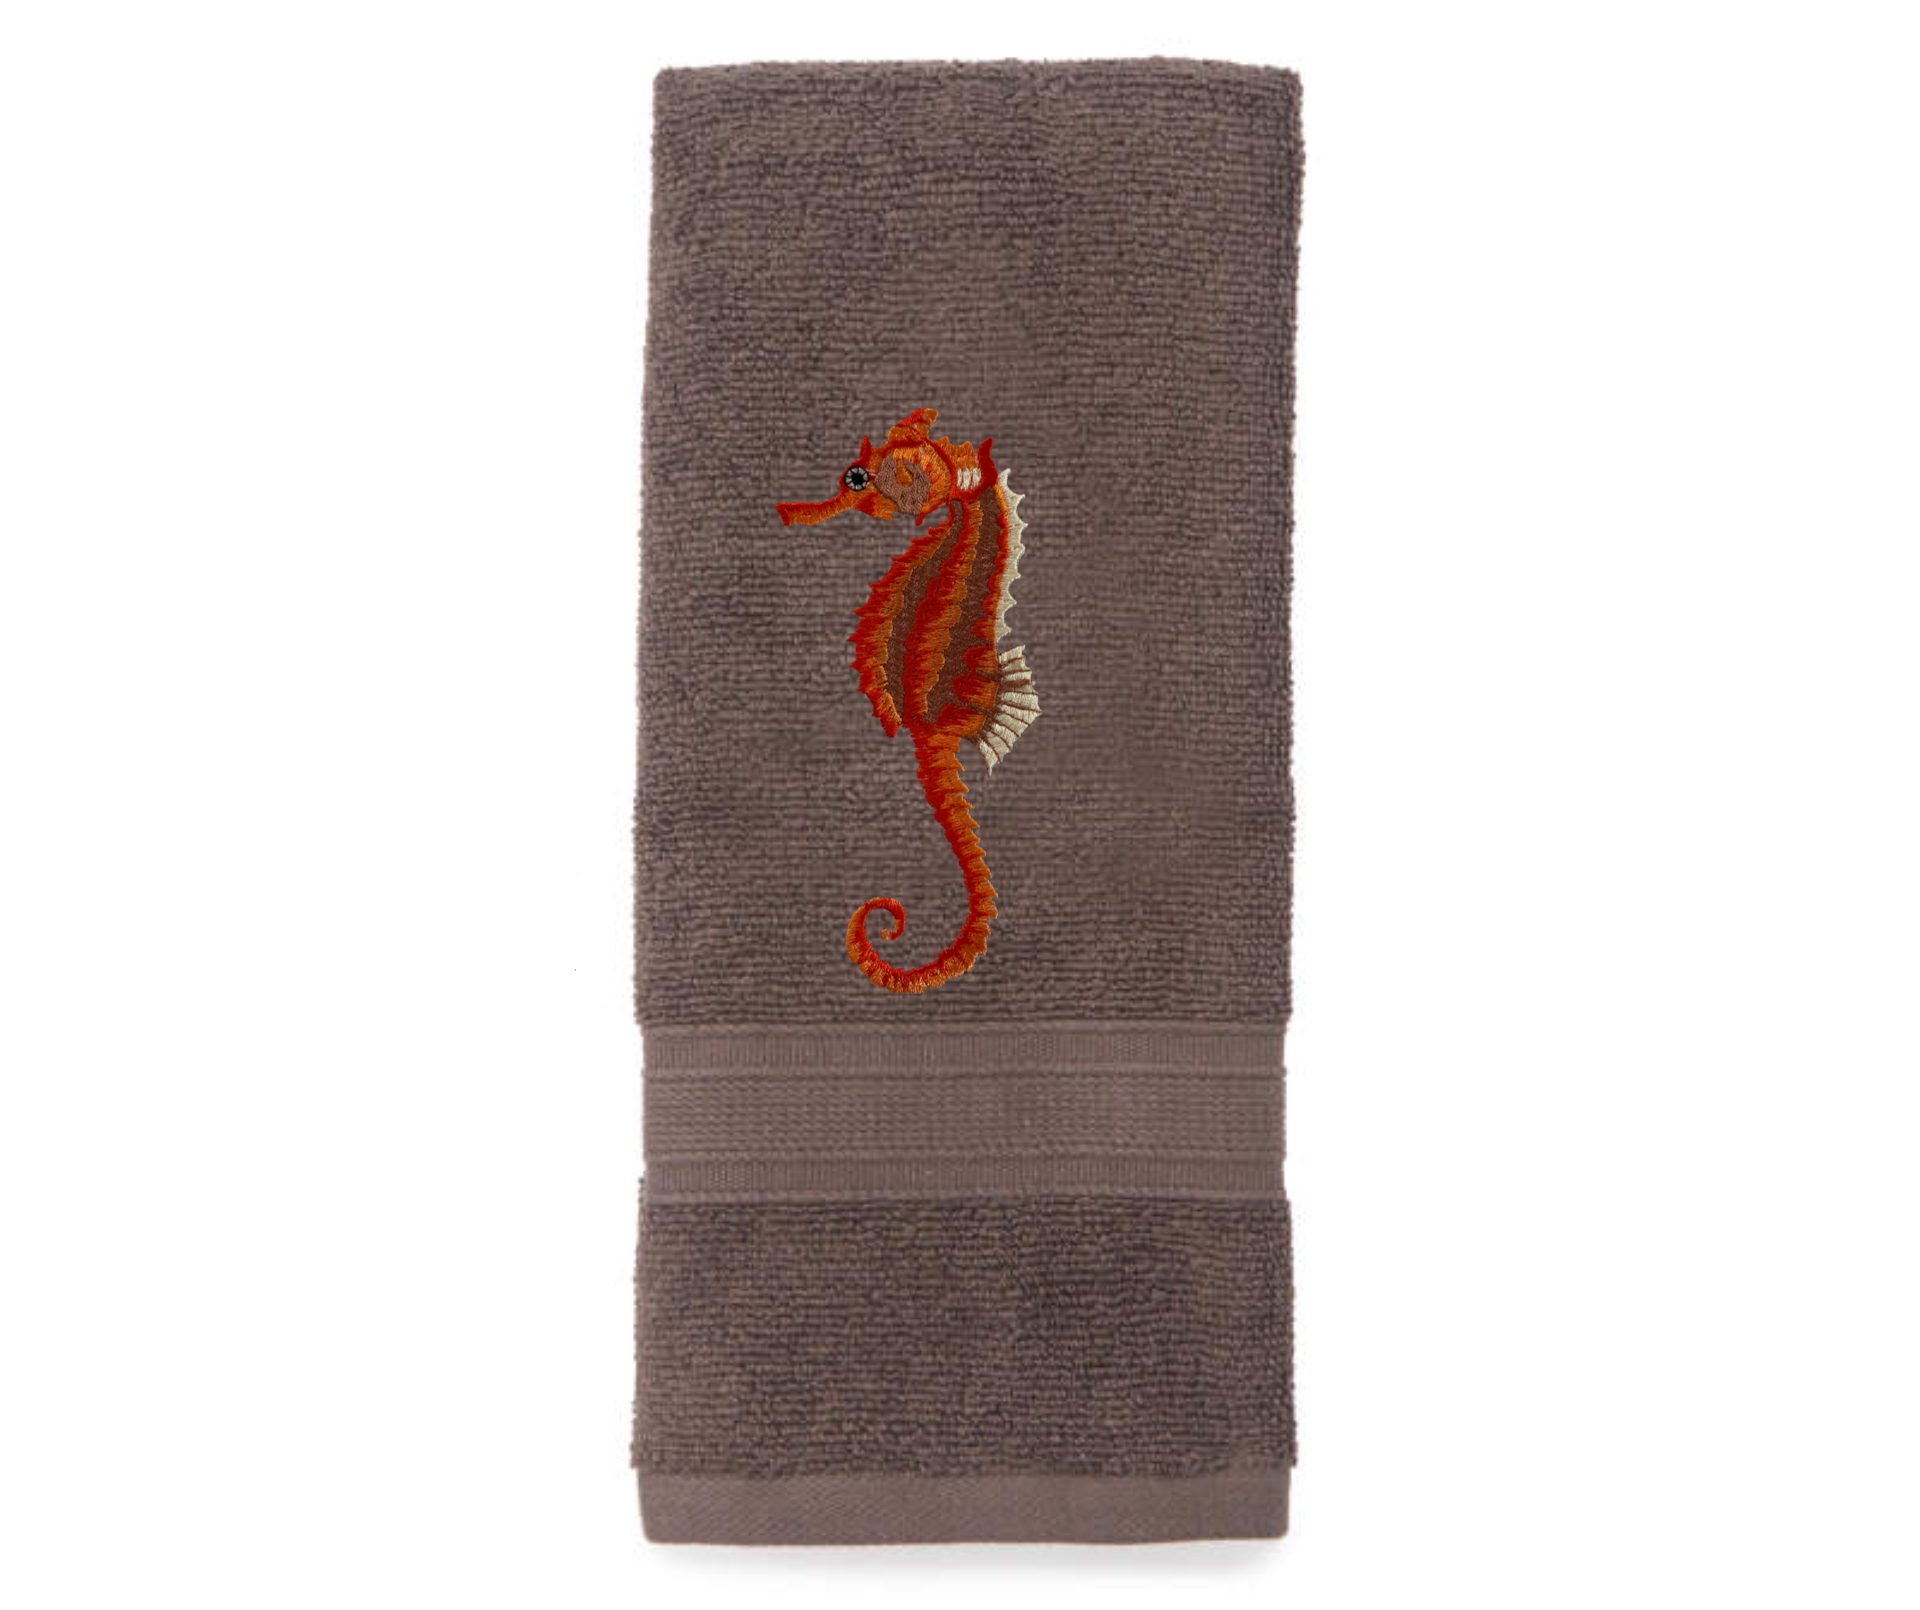 Seahorse Embroidered Bath Hand Towel. Beautifully Detailed Vibrant